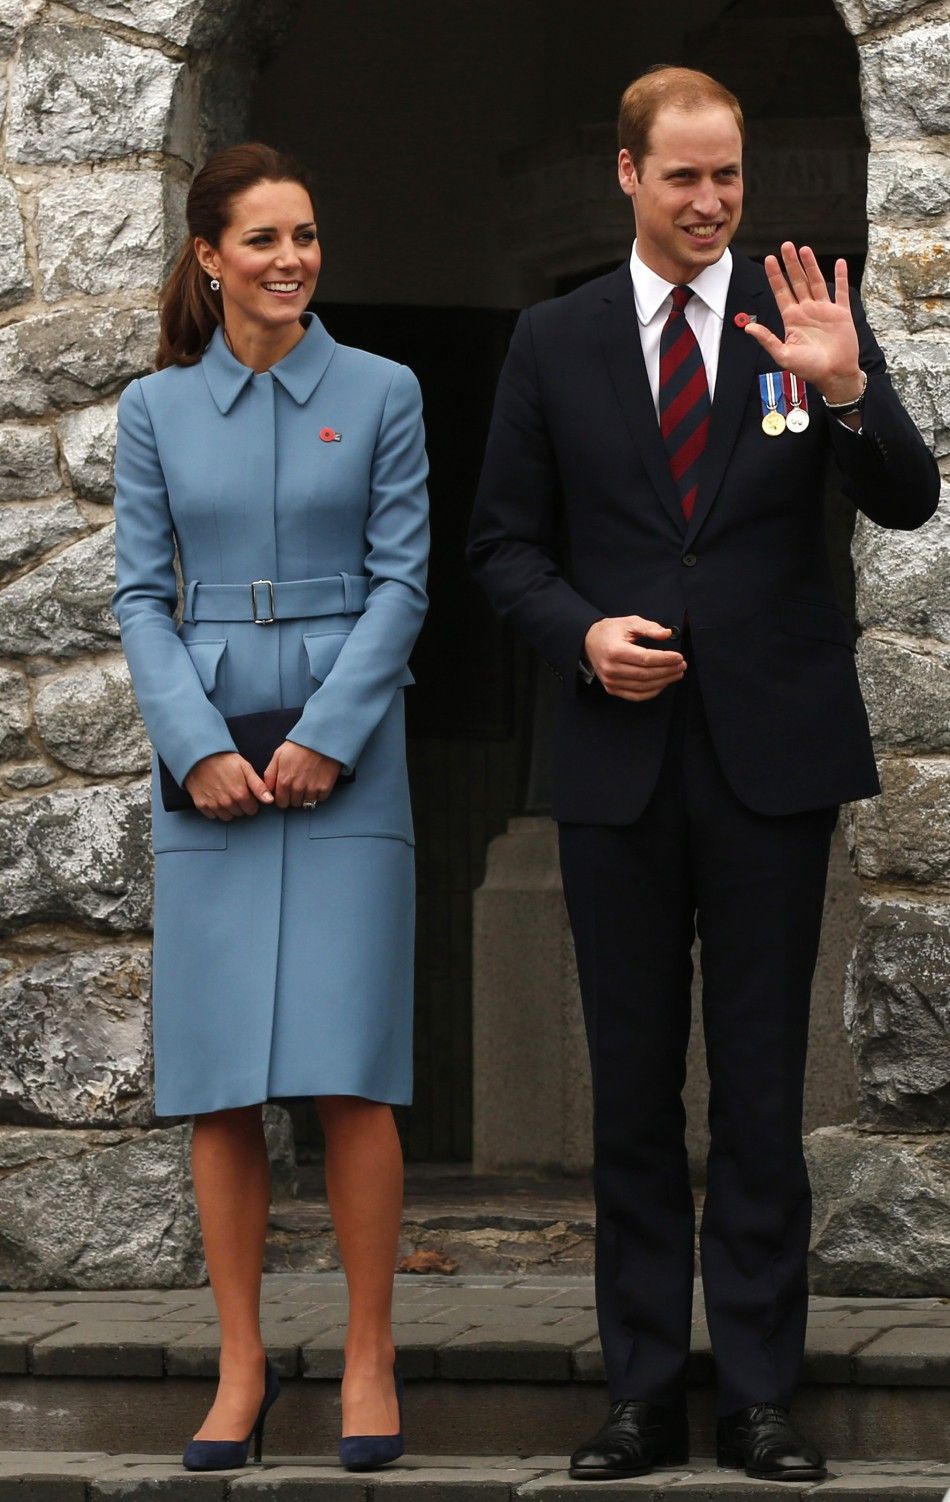 Britains Prince William and his wife Catherine, the Duchess of Cambridge, stand together after laying a wreath at the war memorial in the town of Blenheim